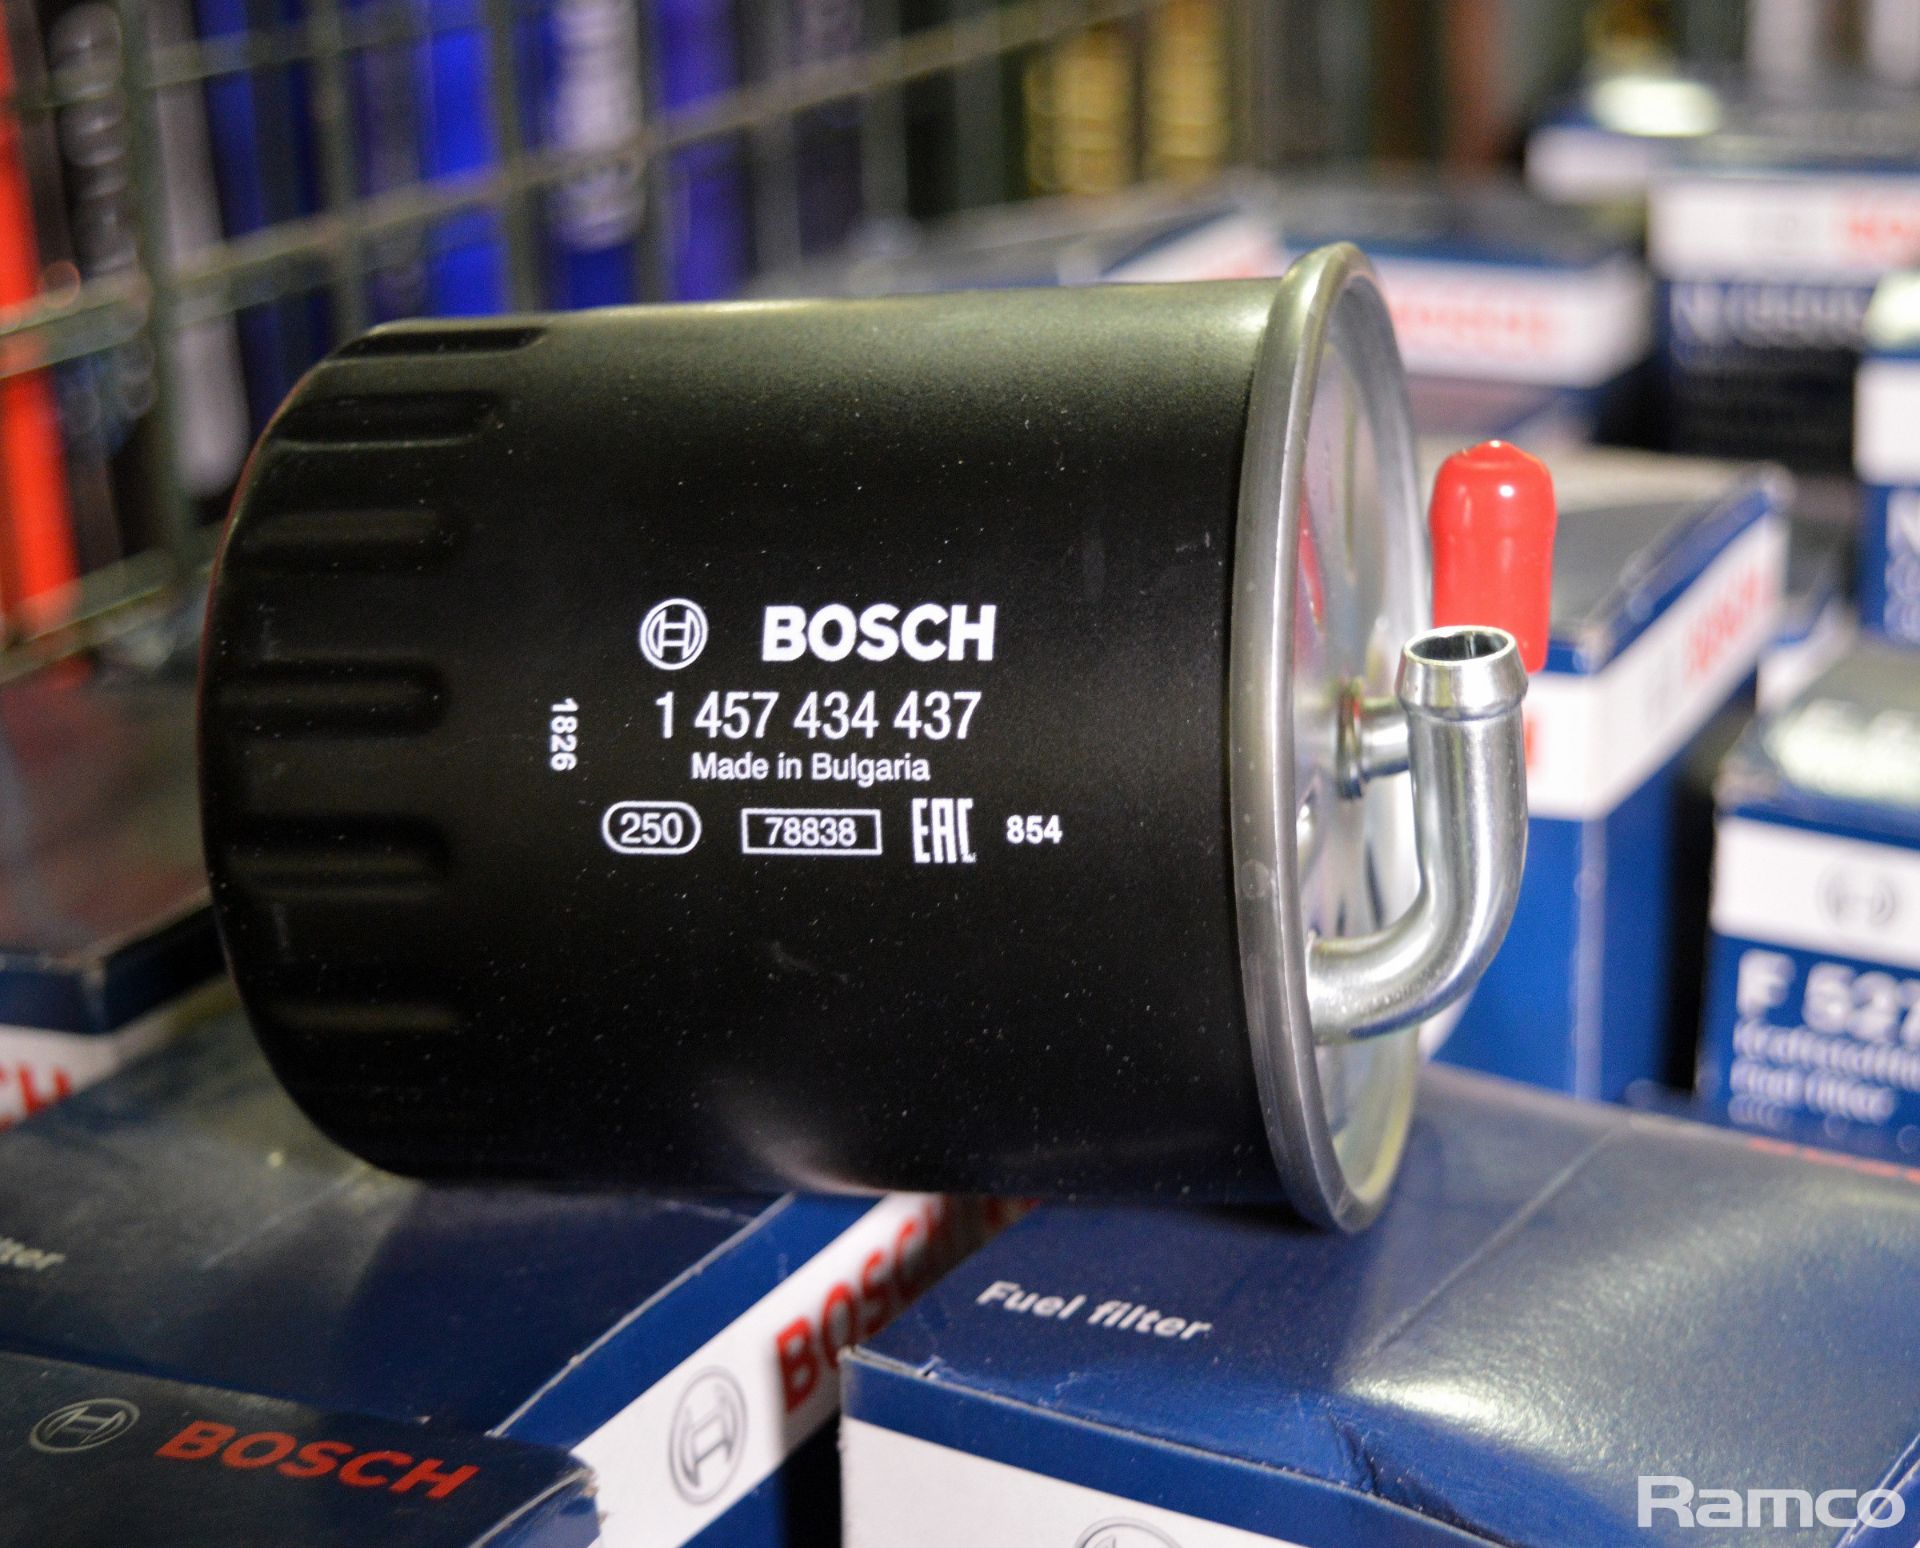 Spark plugs - NGK, Bosch, NGK Platinum, Bosch fuel filters, Glowplugs - see pictures for m - Image 4 of 6